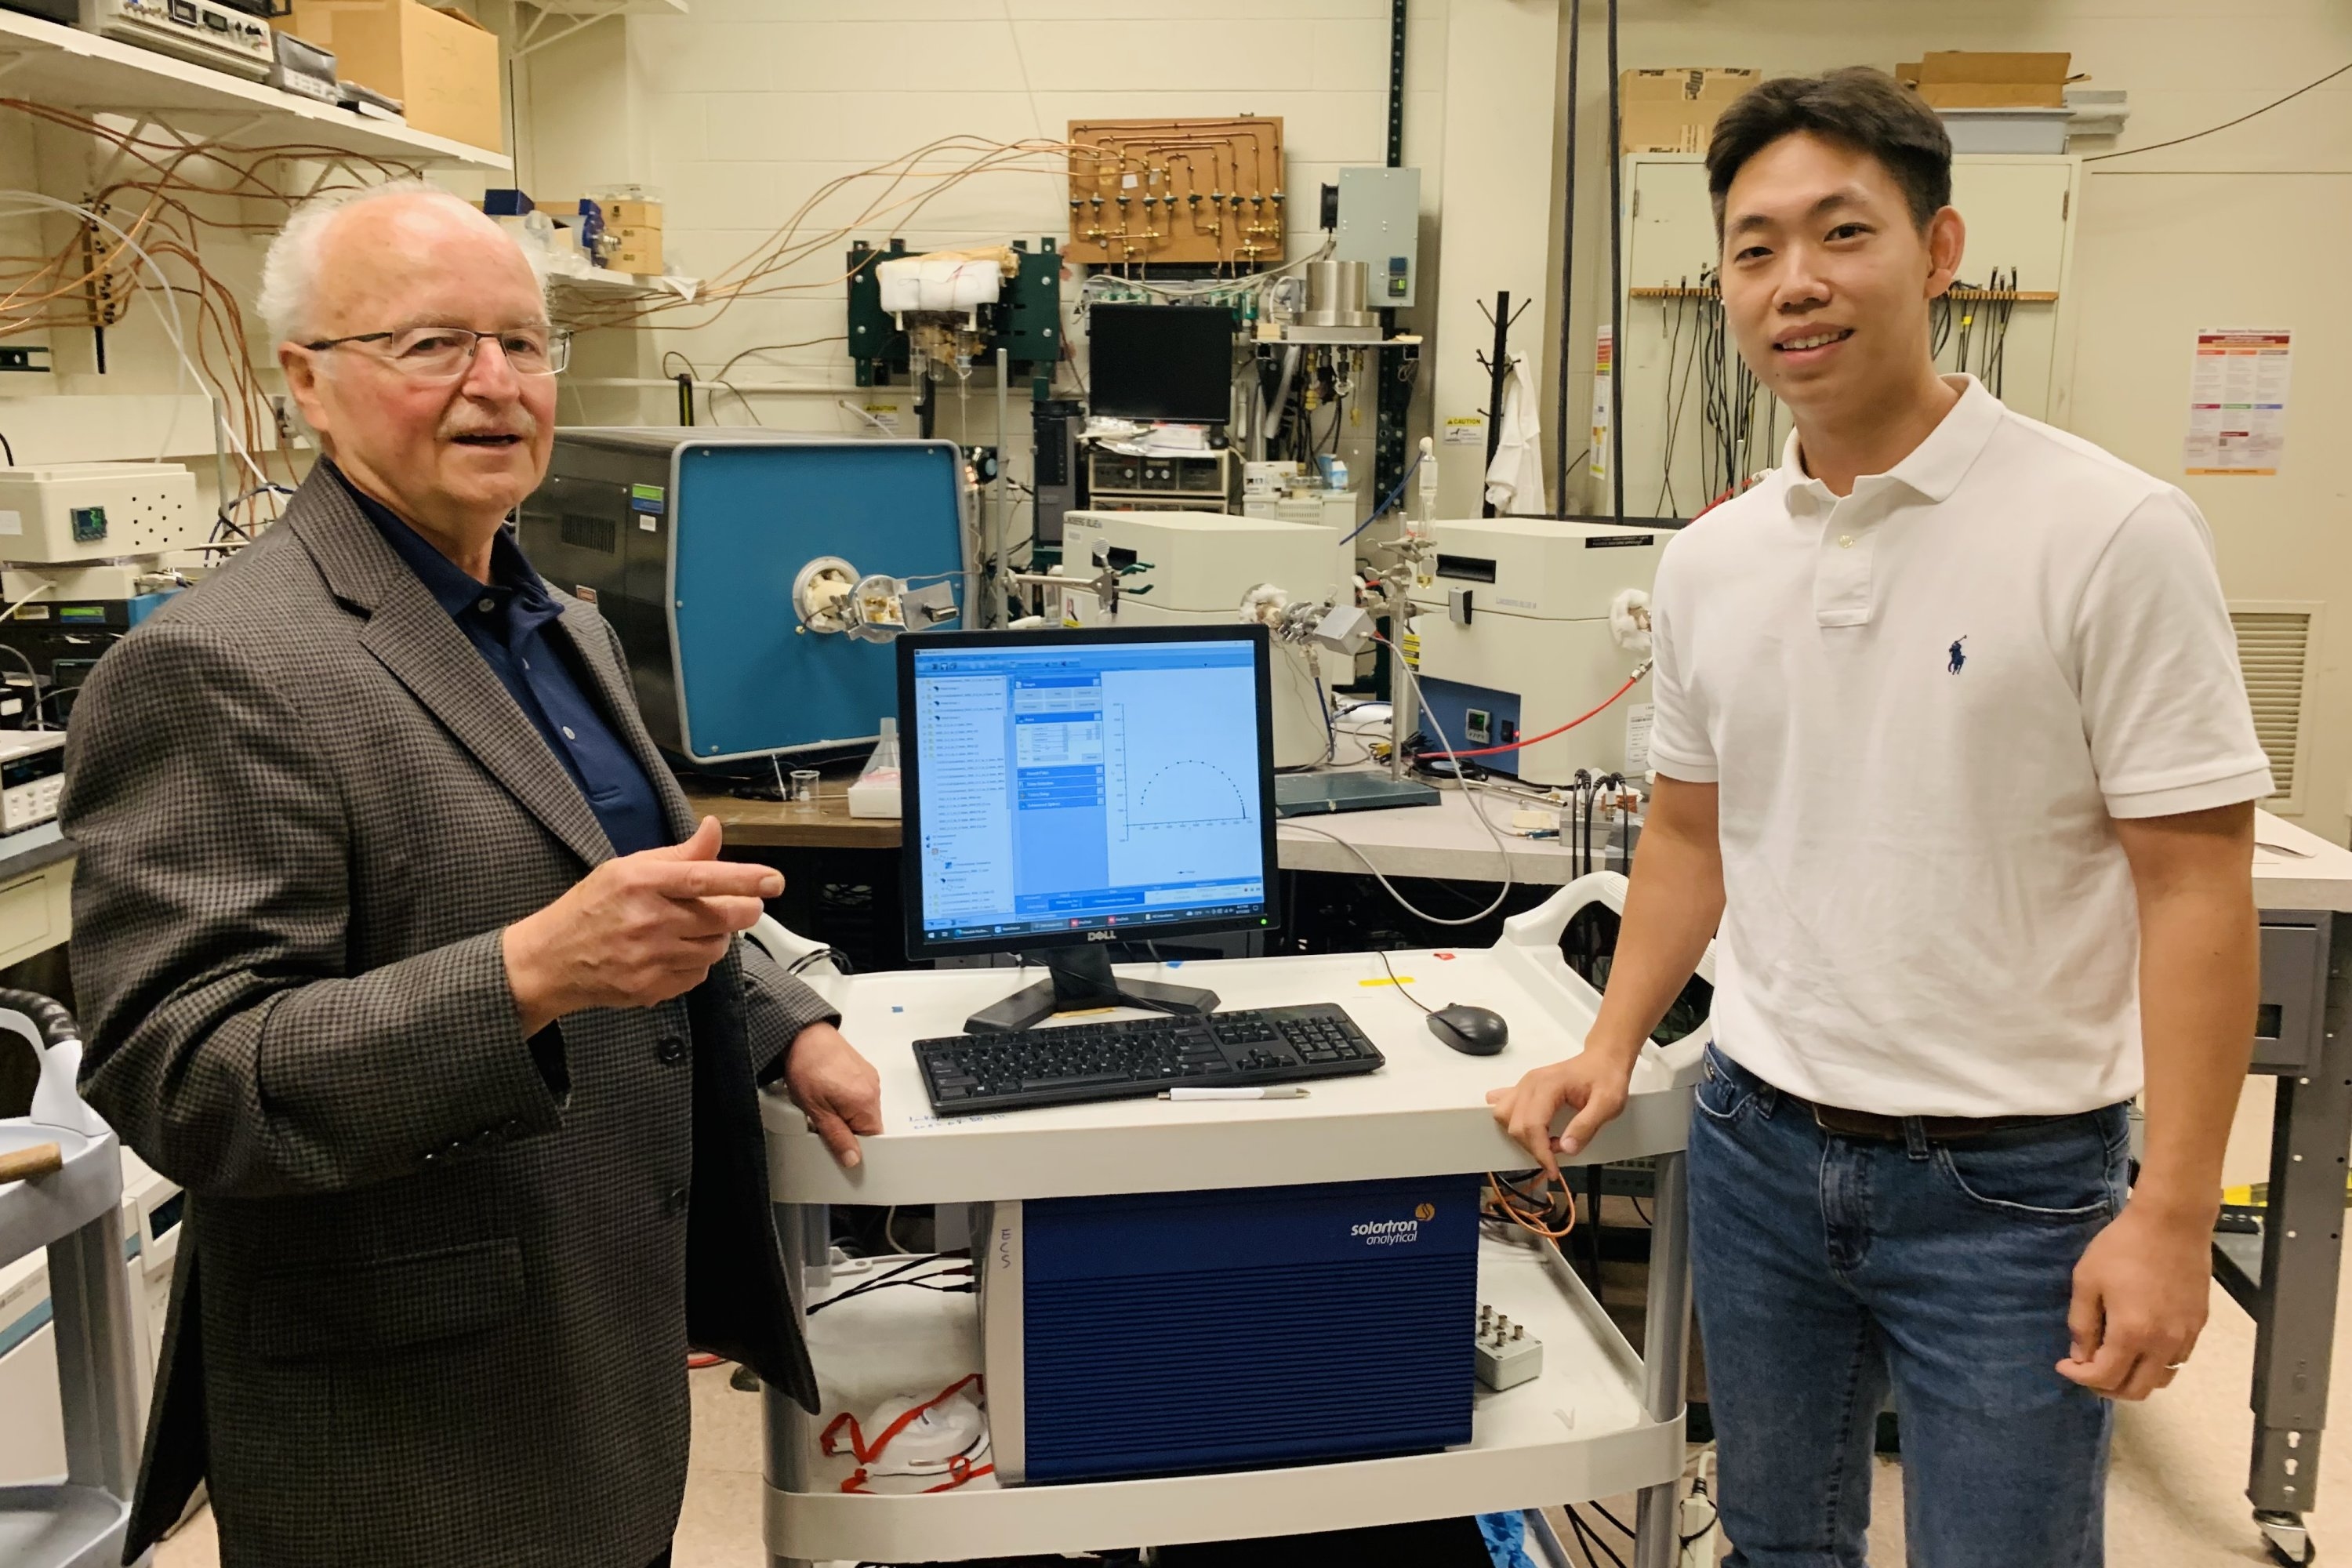 A simple way to significantly increase lifetimes of fuel cells and other devices